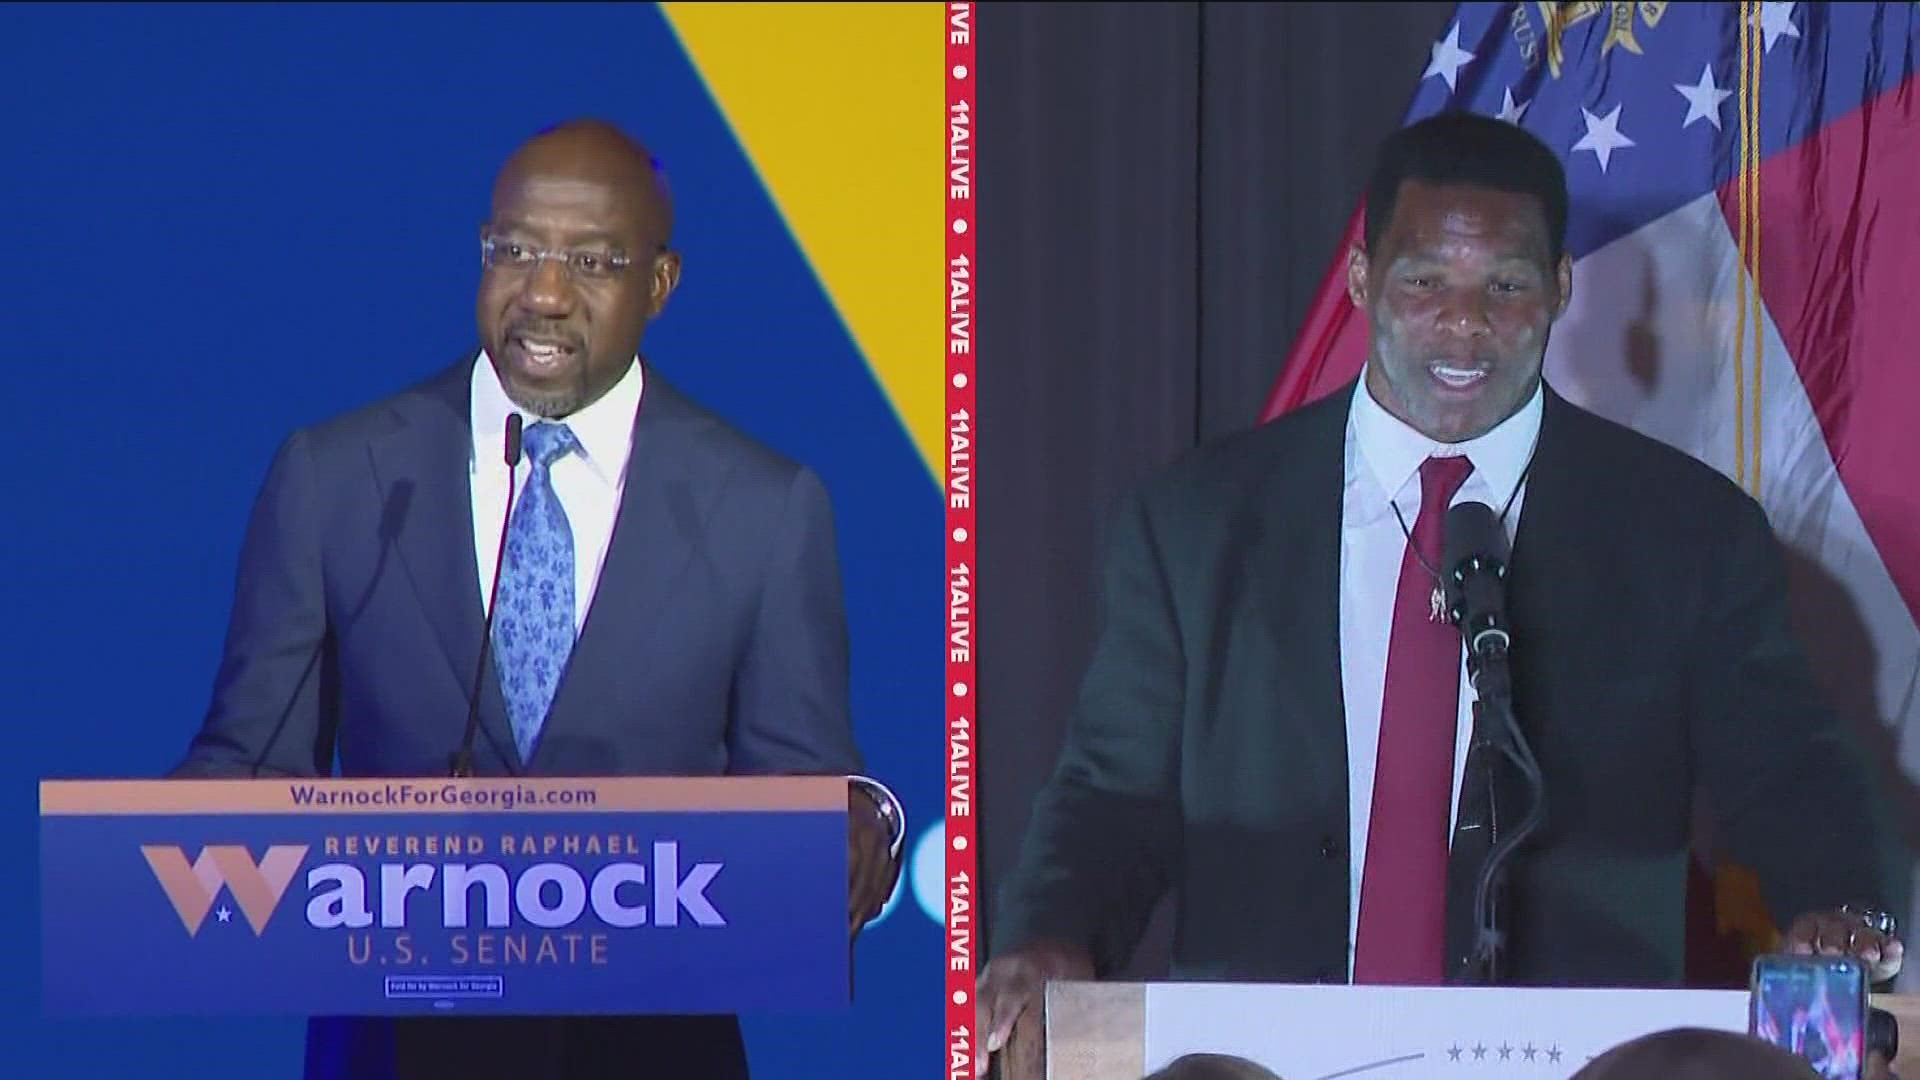 The Warnock campaign announced on Monday that a rally would be held on Thursday, Dec. 1 in Atlanta.